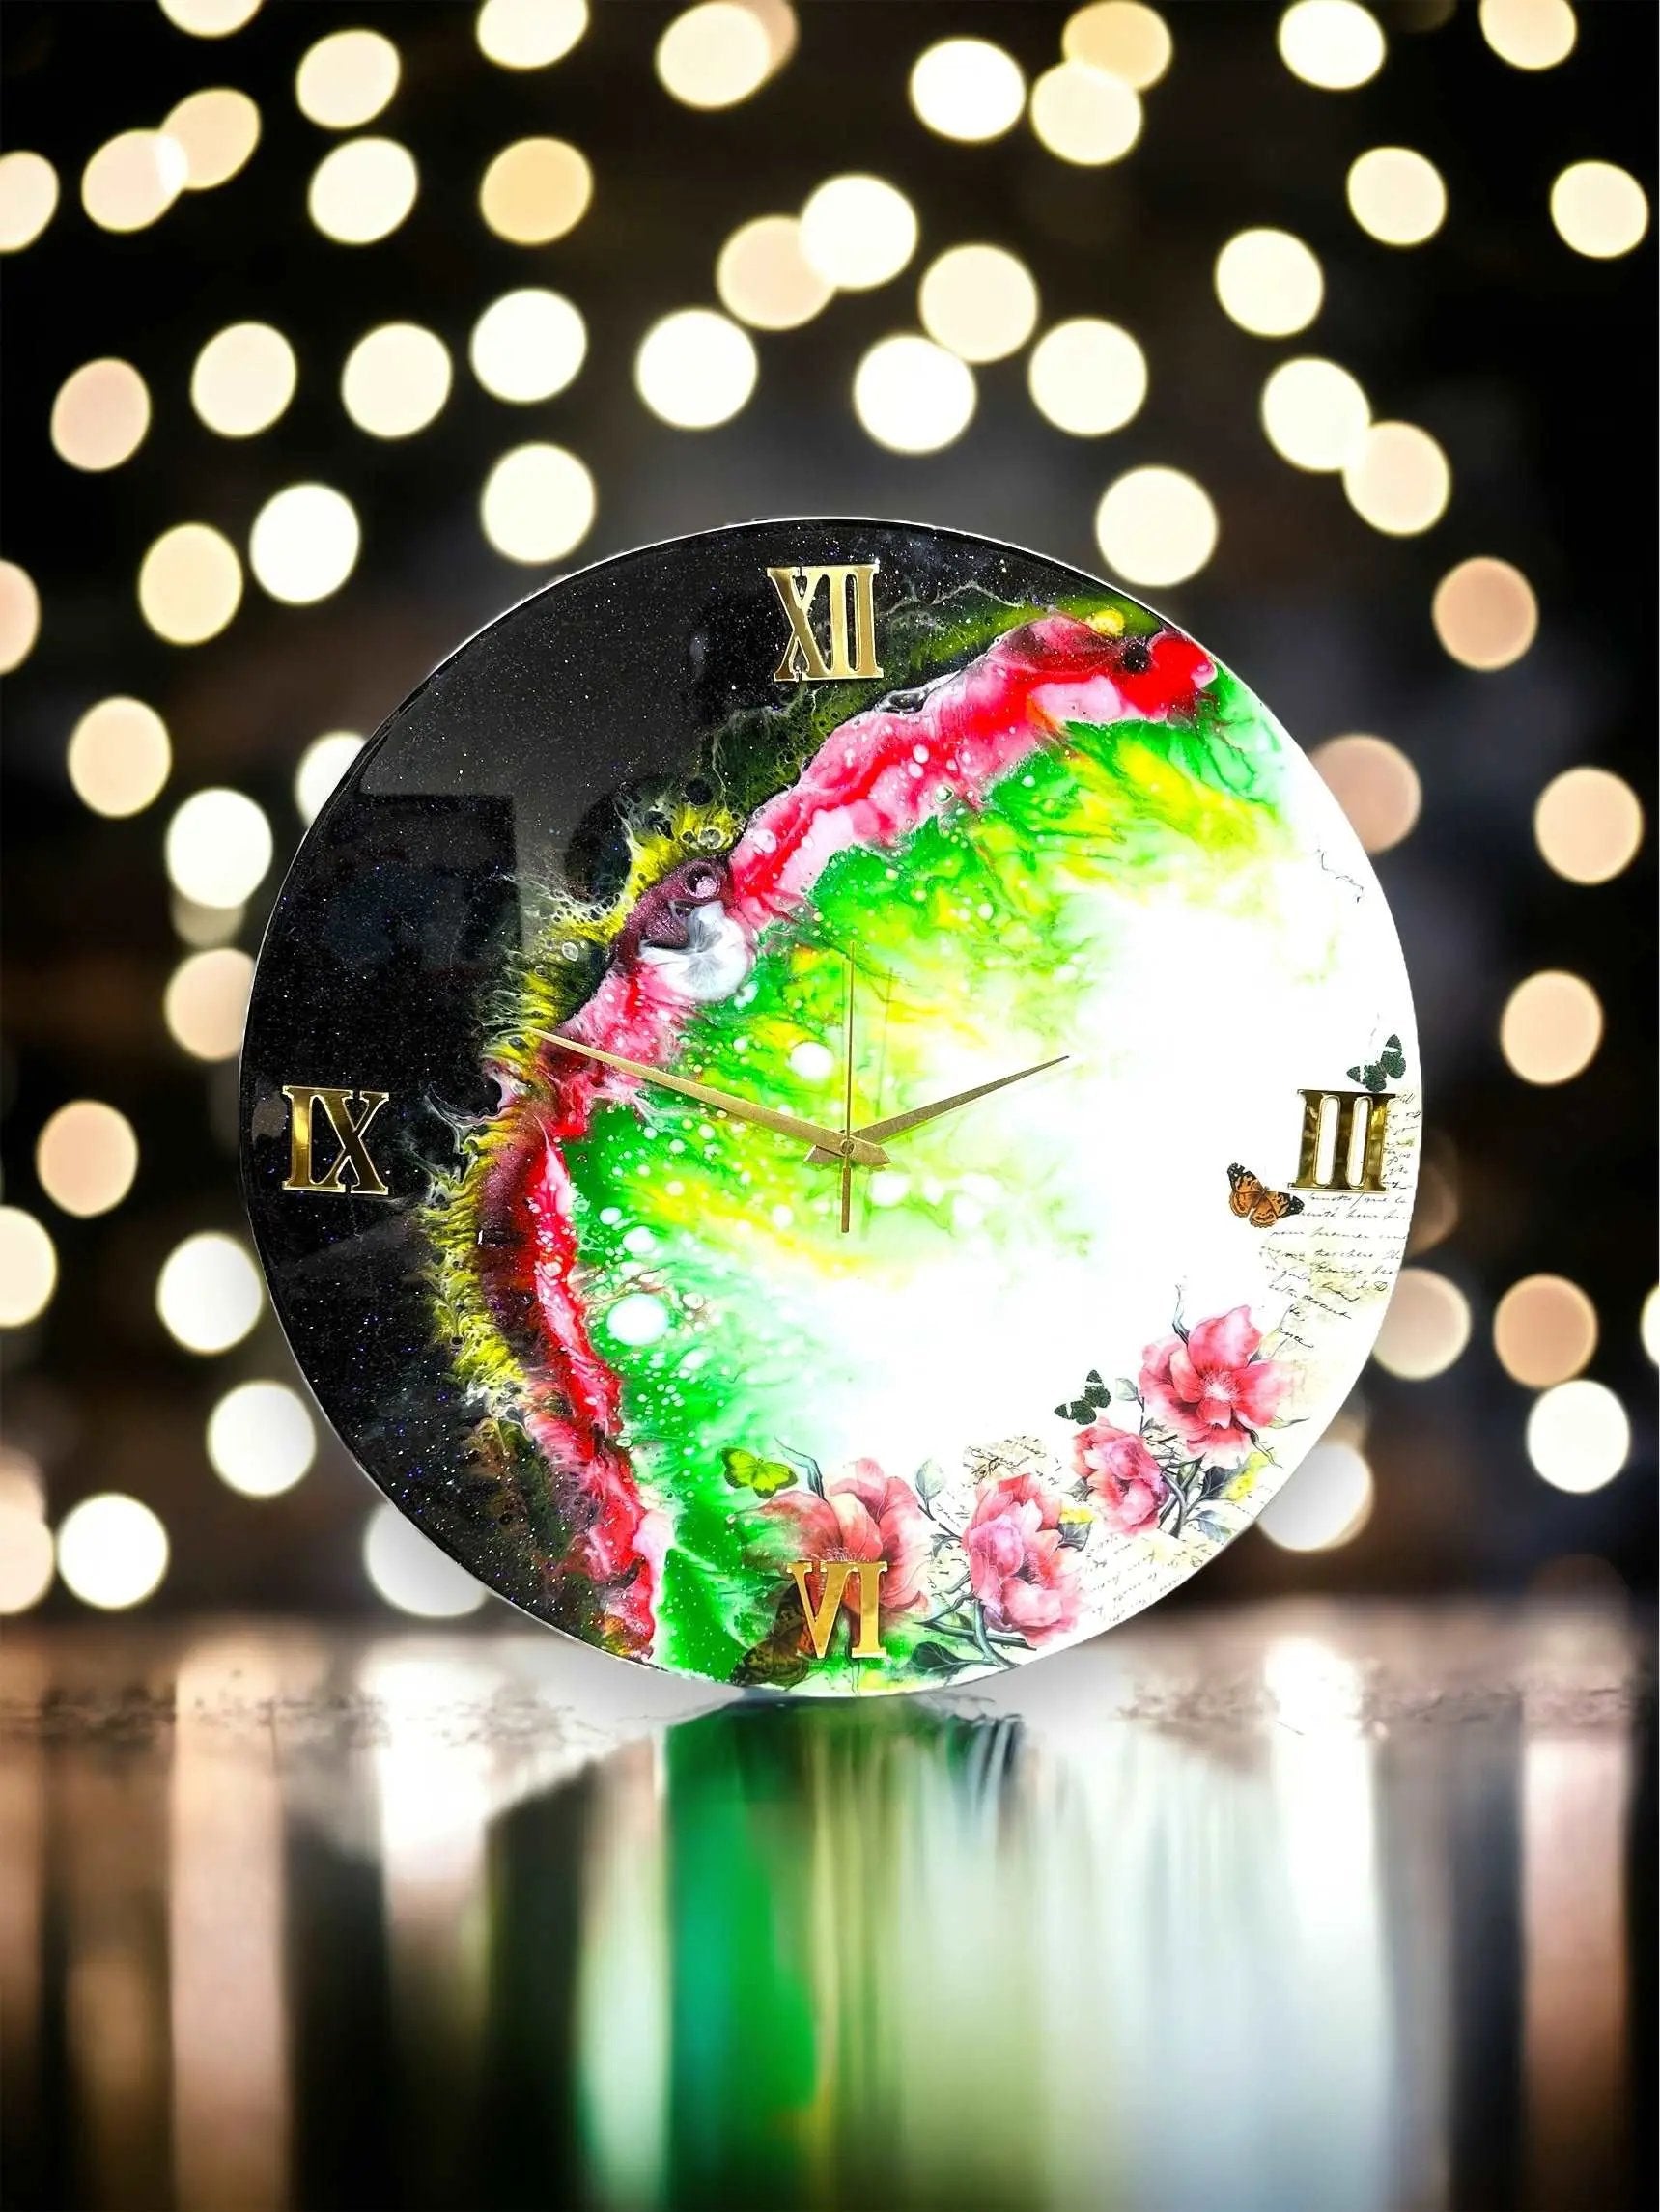 Abstract Art in Motion: Epoxy Resin Wall Clock with Shimmering Colors